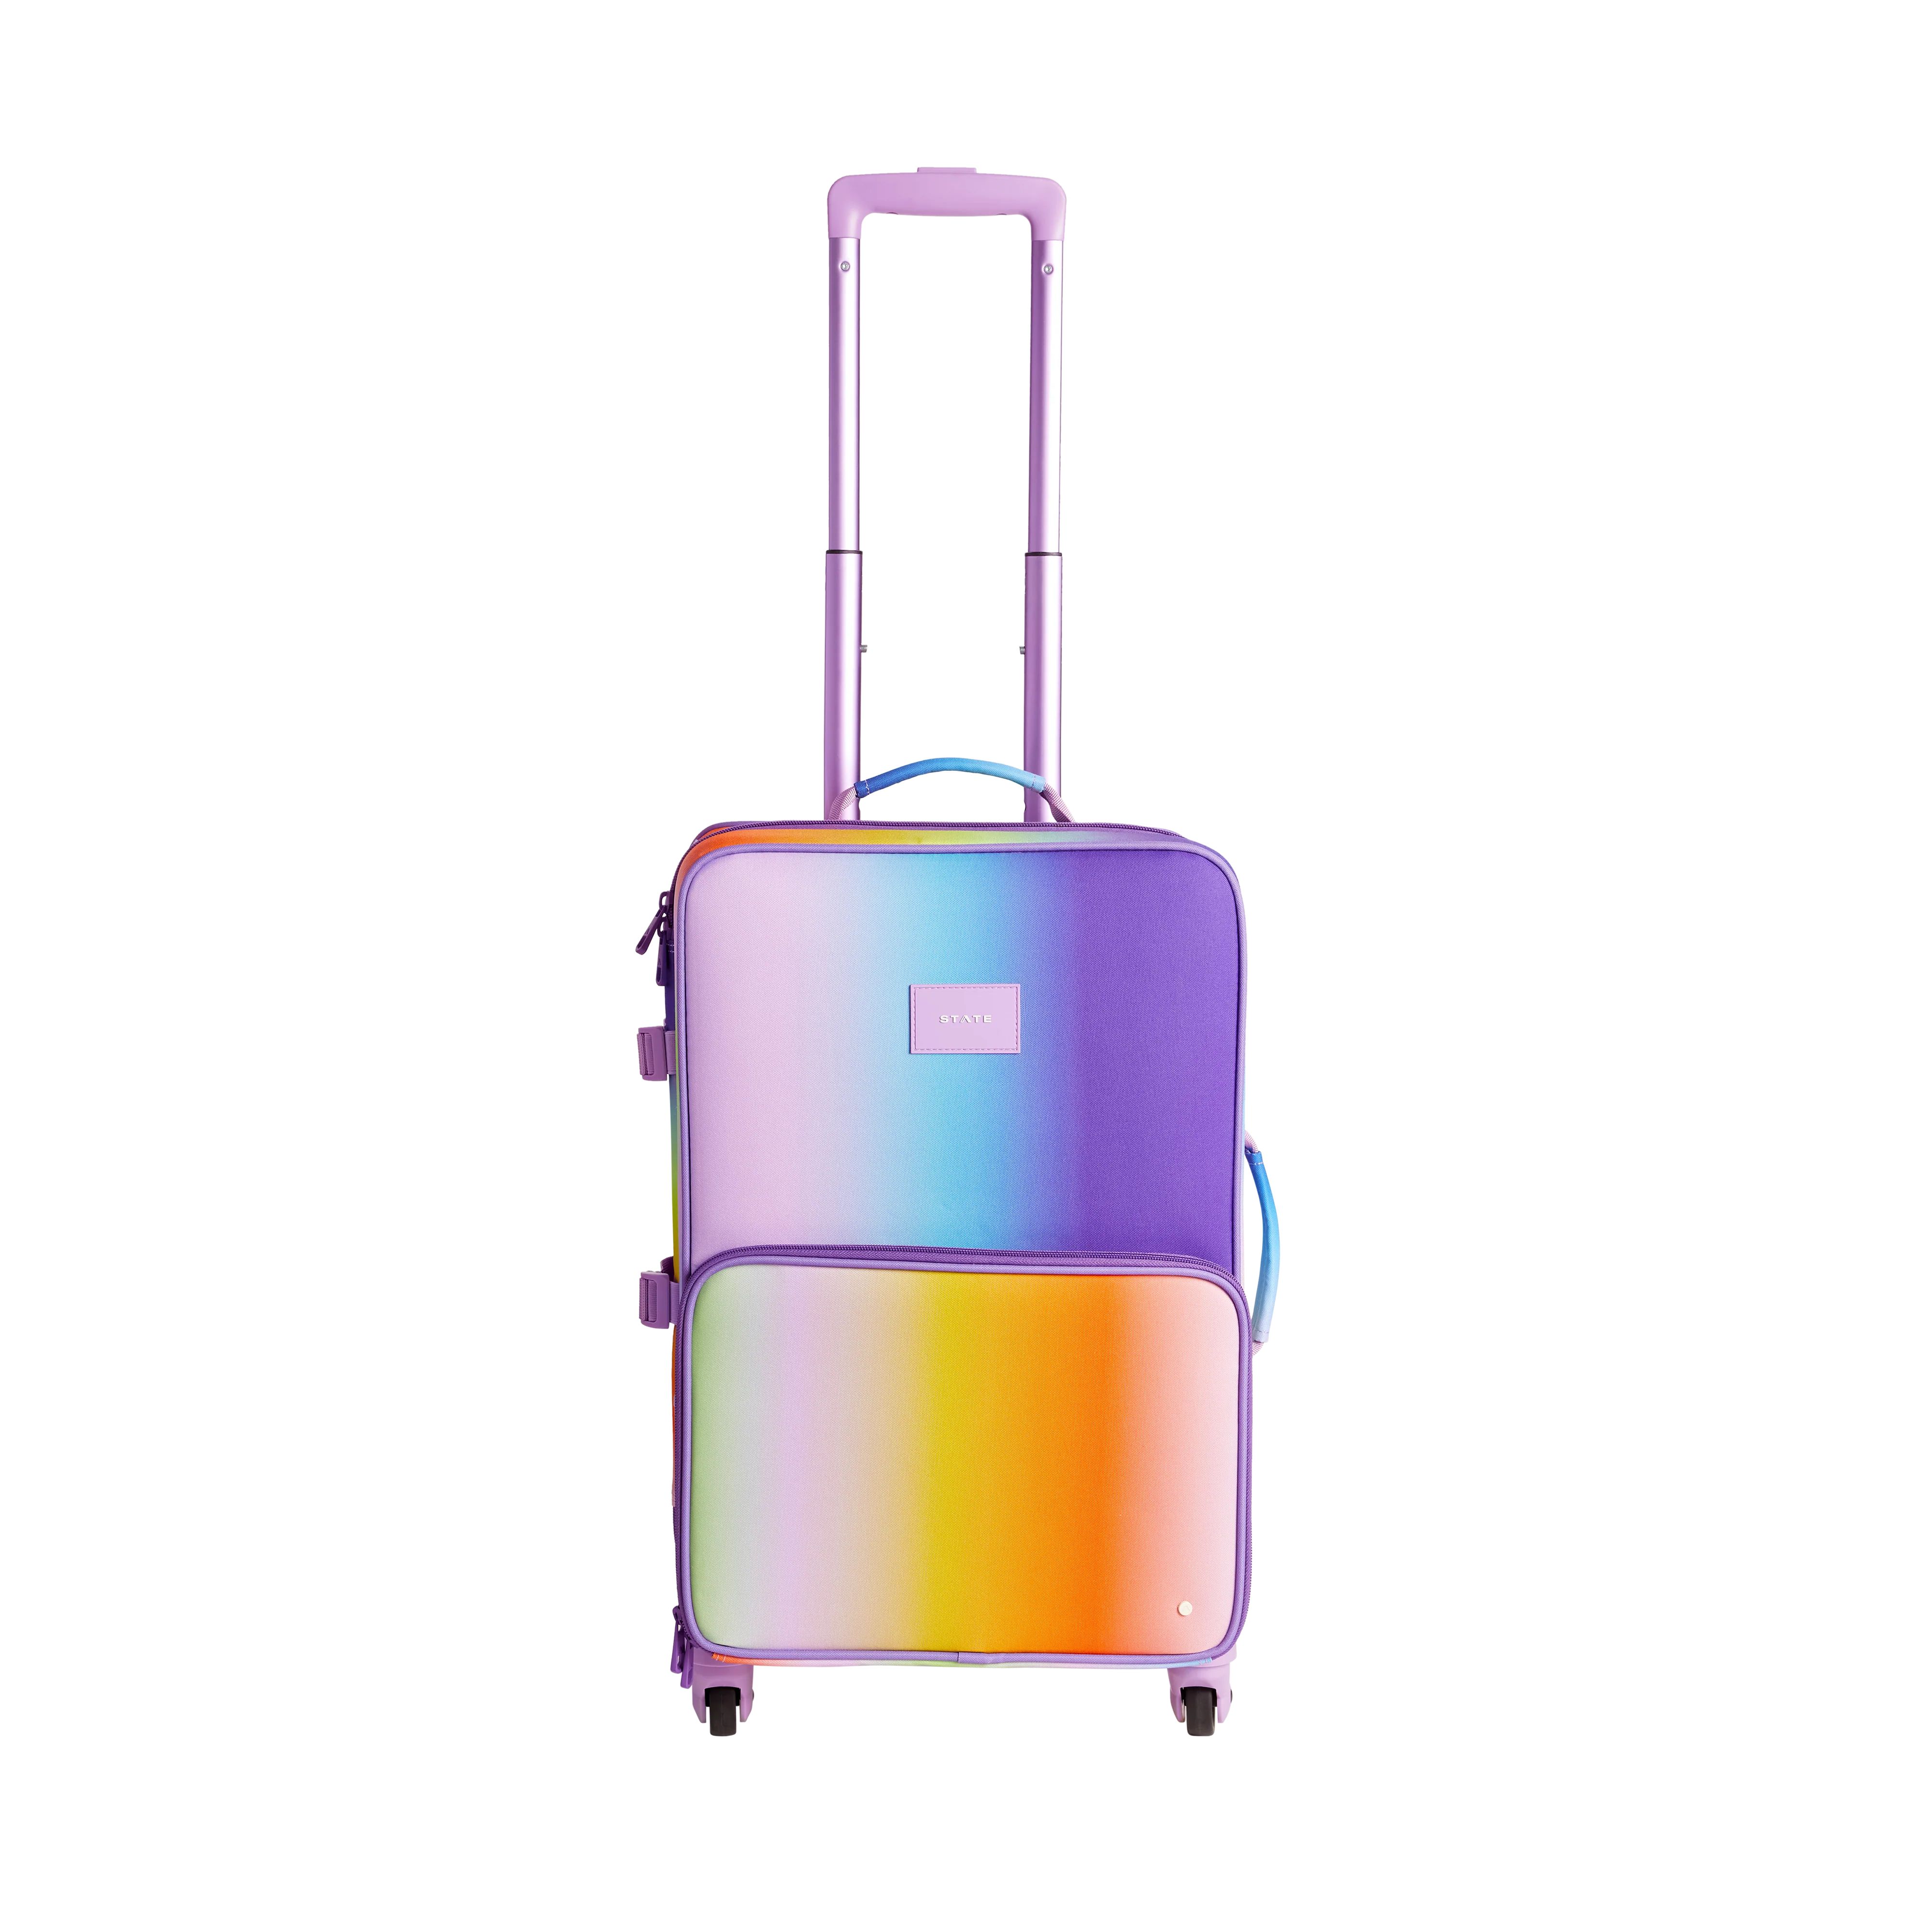 STATE Bags | Logan Suitcase Polyester Canvas Rainbow Gradient | STATE Bags